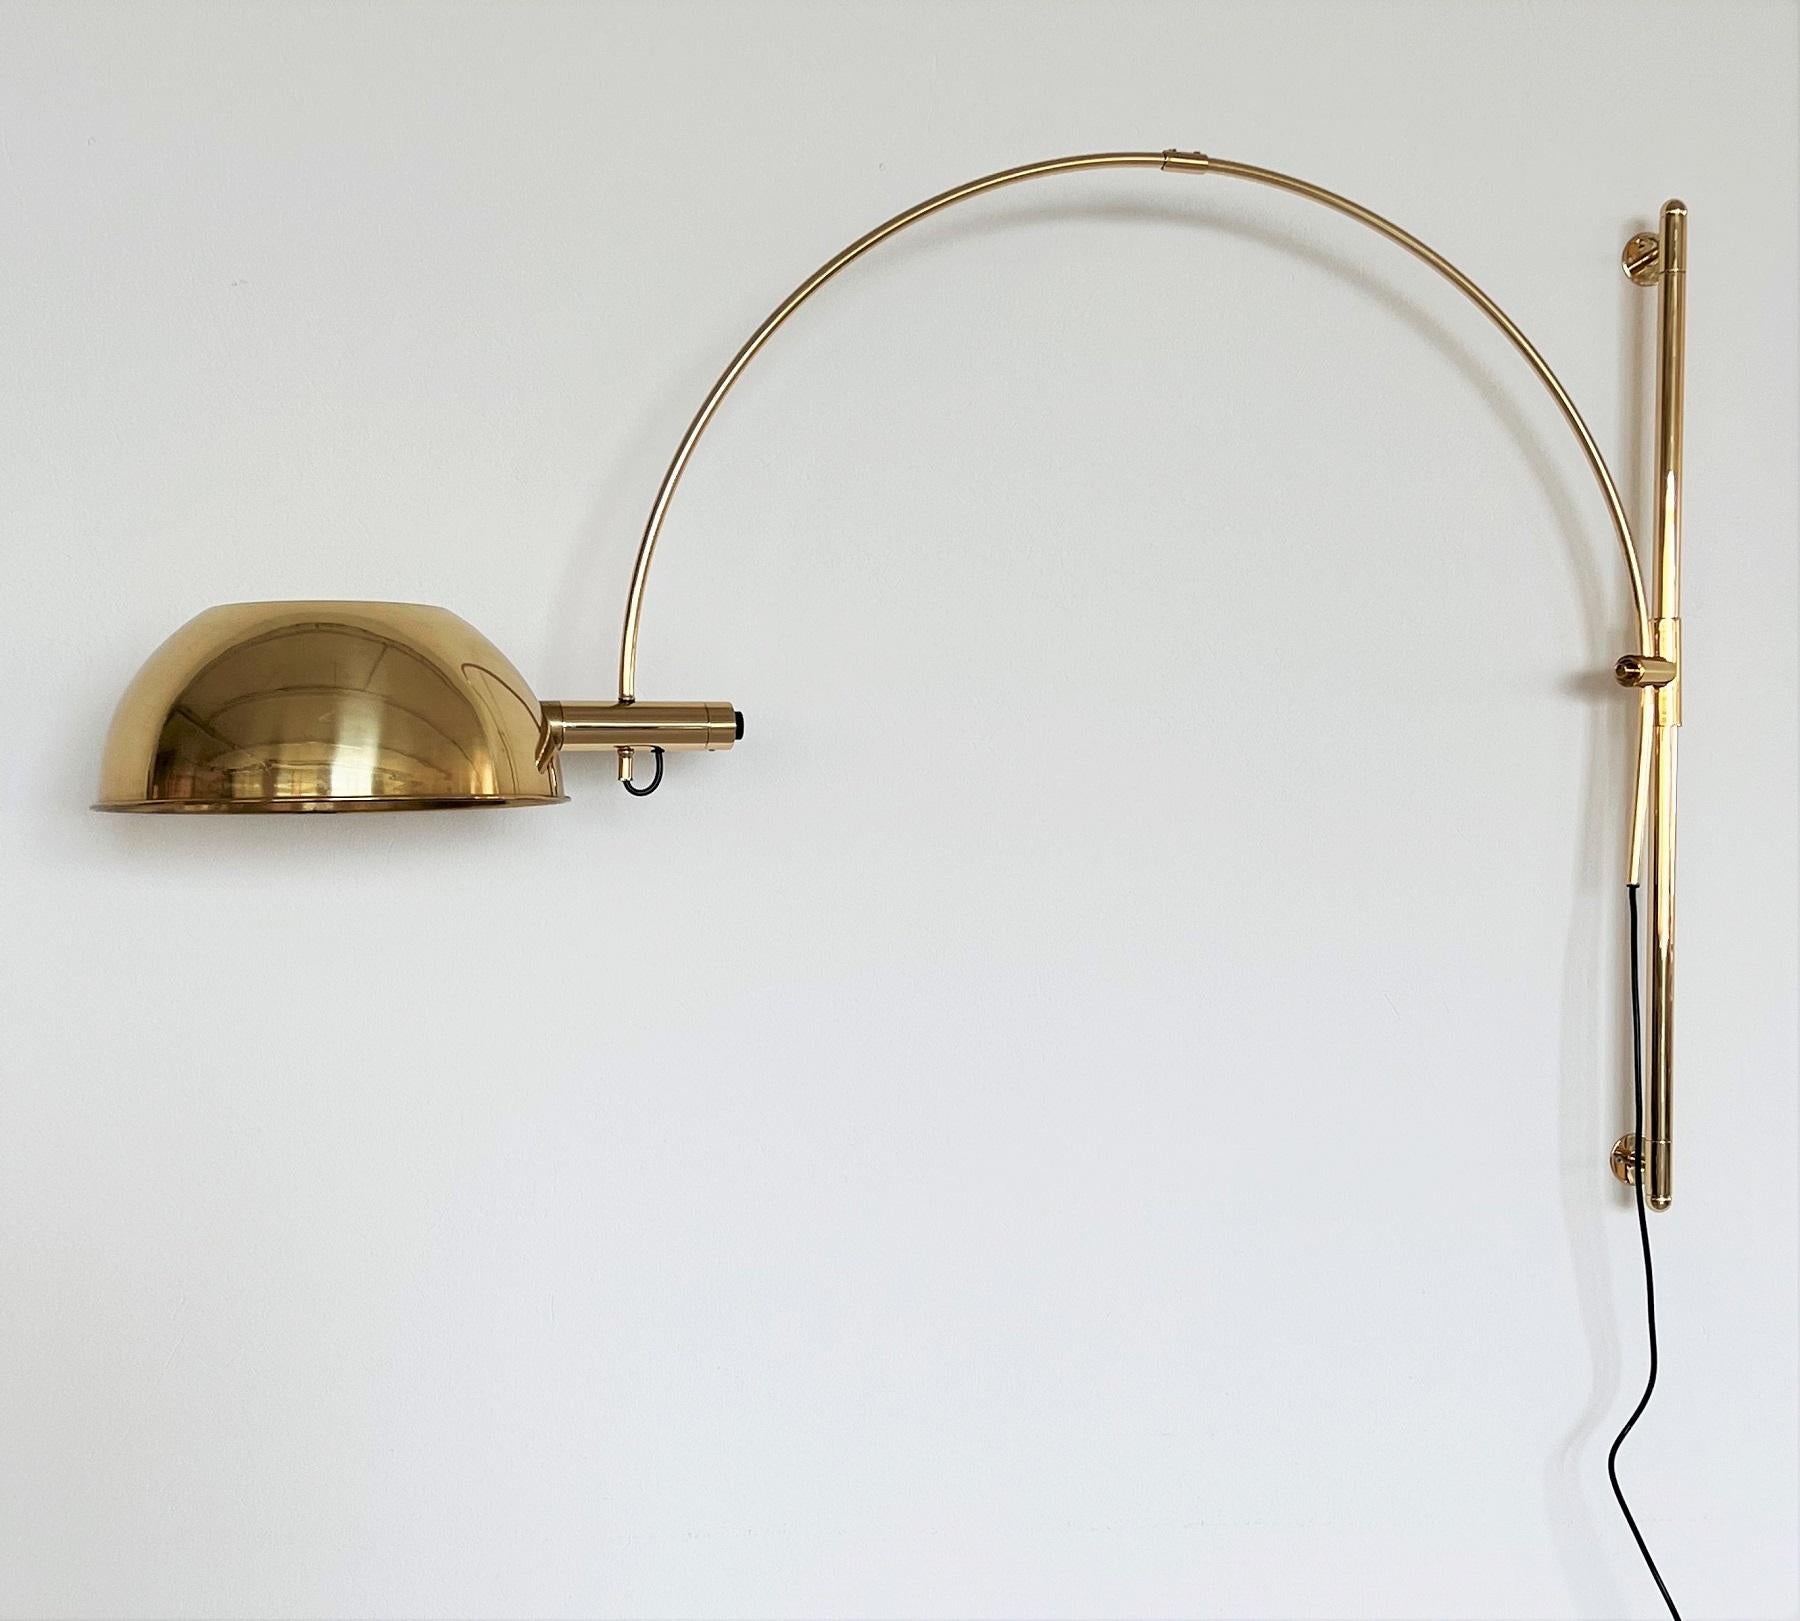 German Florian Schulz Vintage Adjustable Wall Mounted Arc Lamp in Brass, 1970s